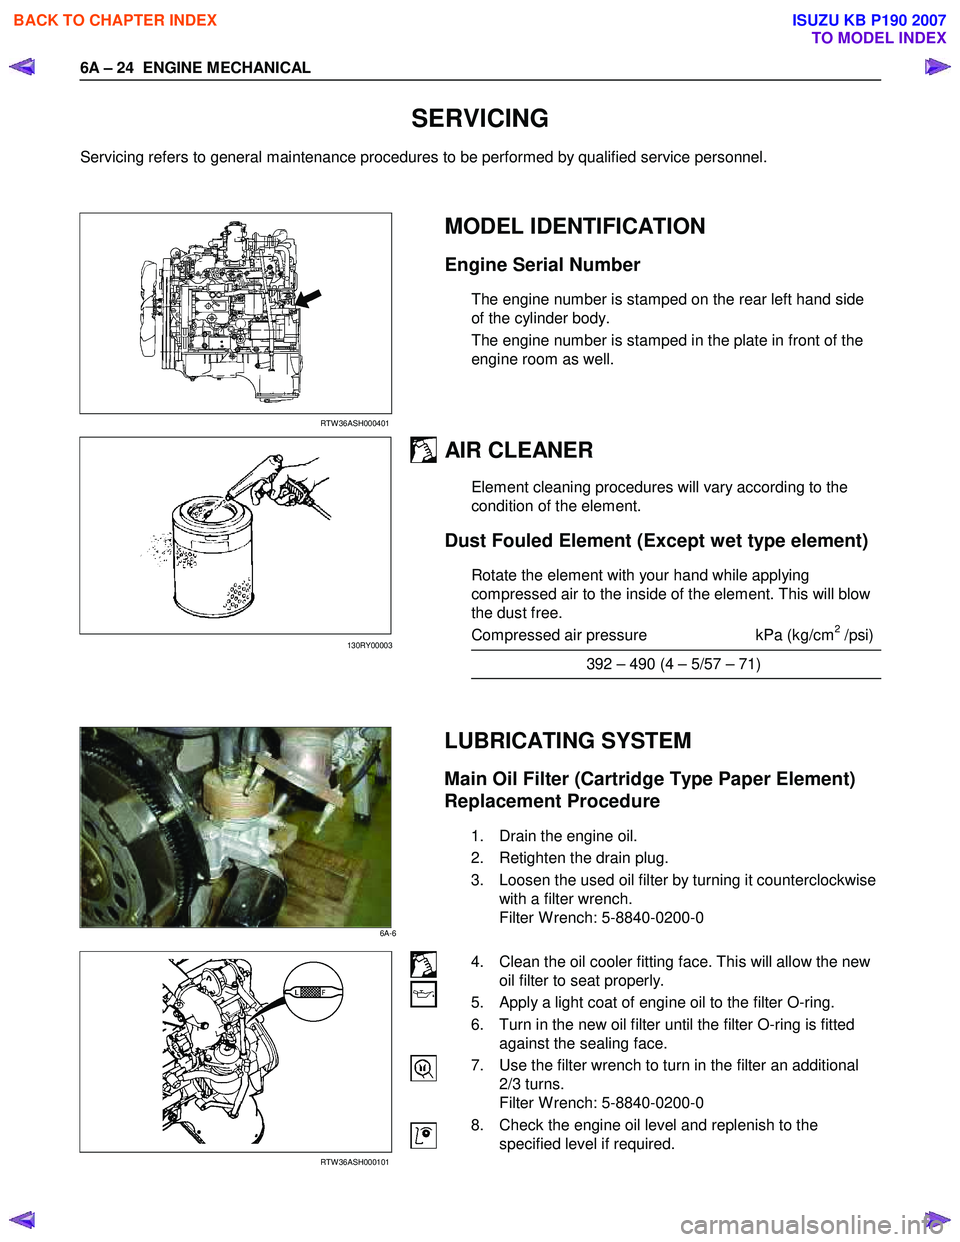 ISUZU KB P190 2007  Workshop Repair Manual 6A – 24  ENGINE MECHANICAL 
 
SERVICING 
Servicing refers to general maintenance procedures to be performed by qualified service personnel.  
 
 
RTW 36ASH000401   
MODEL IDENTIFICATION 
Engine Seri